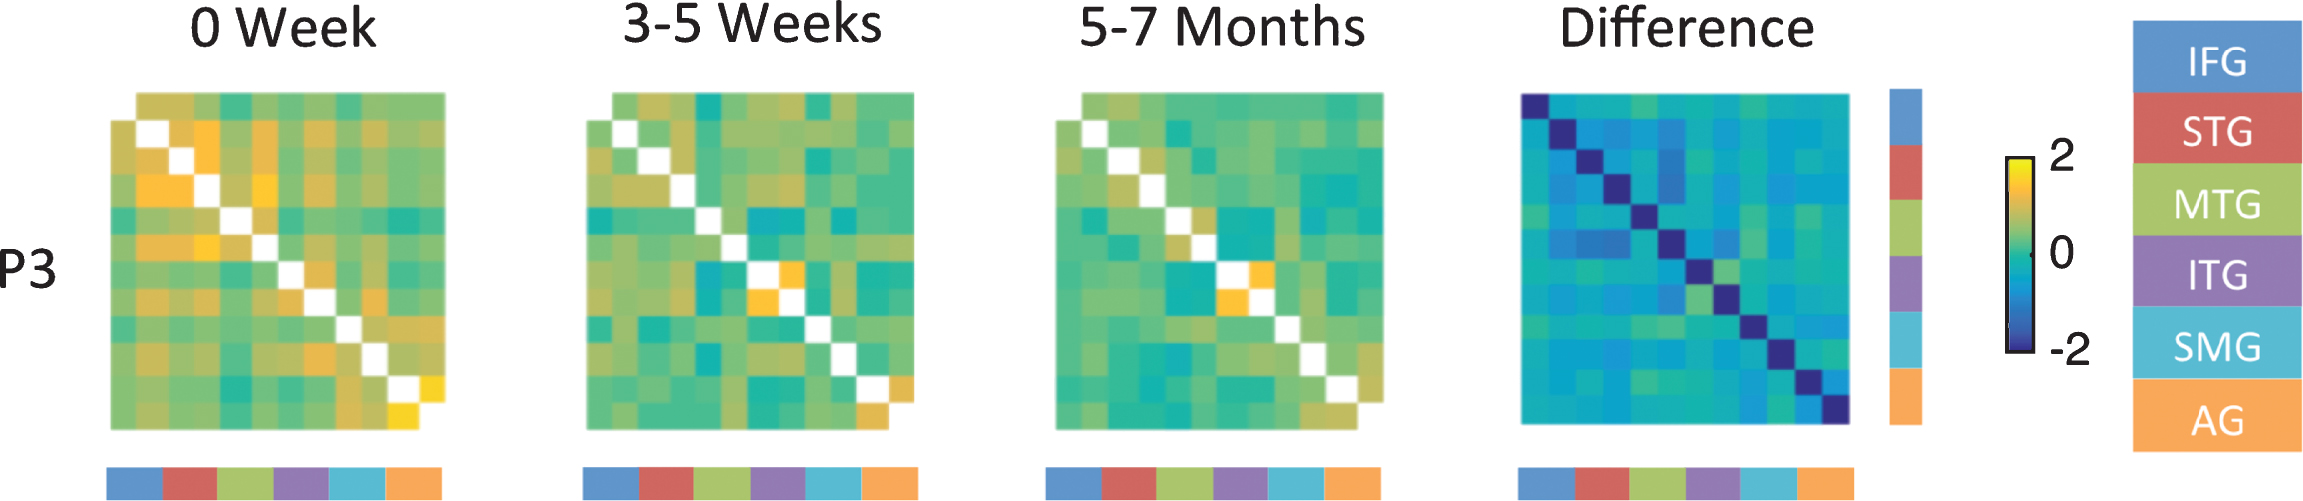 Fisher-transformed correlation matrix for the resting state data for P3 (who showed persistent moderate naming deficit) at each time point. Difference map shows the difference in correlation between the 5–7 month scan and the 0 week scan for the resting-state data. Correlations were assessed across 12 ROIs in the language network corresponding to the left and right inferior frontal gyrus (IFG), superior temporal gyrus (STG), middle temporal gyrus (MTG), inferior temporal gyrus (ITG), supramarginal gyrus (SMG), and angular gyrus (AG).